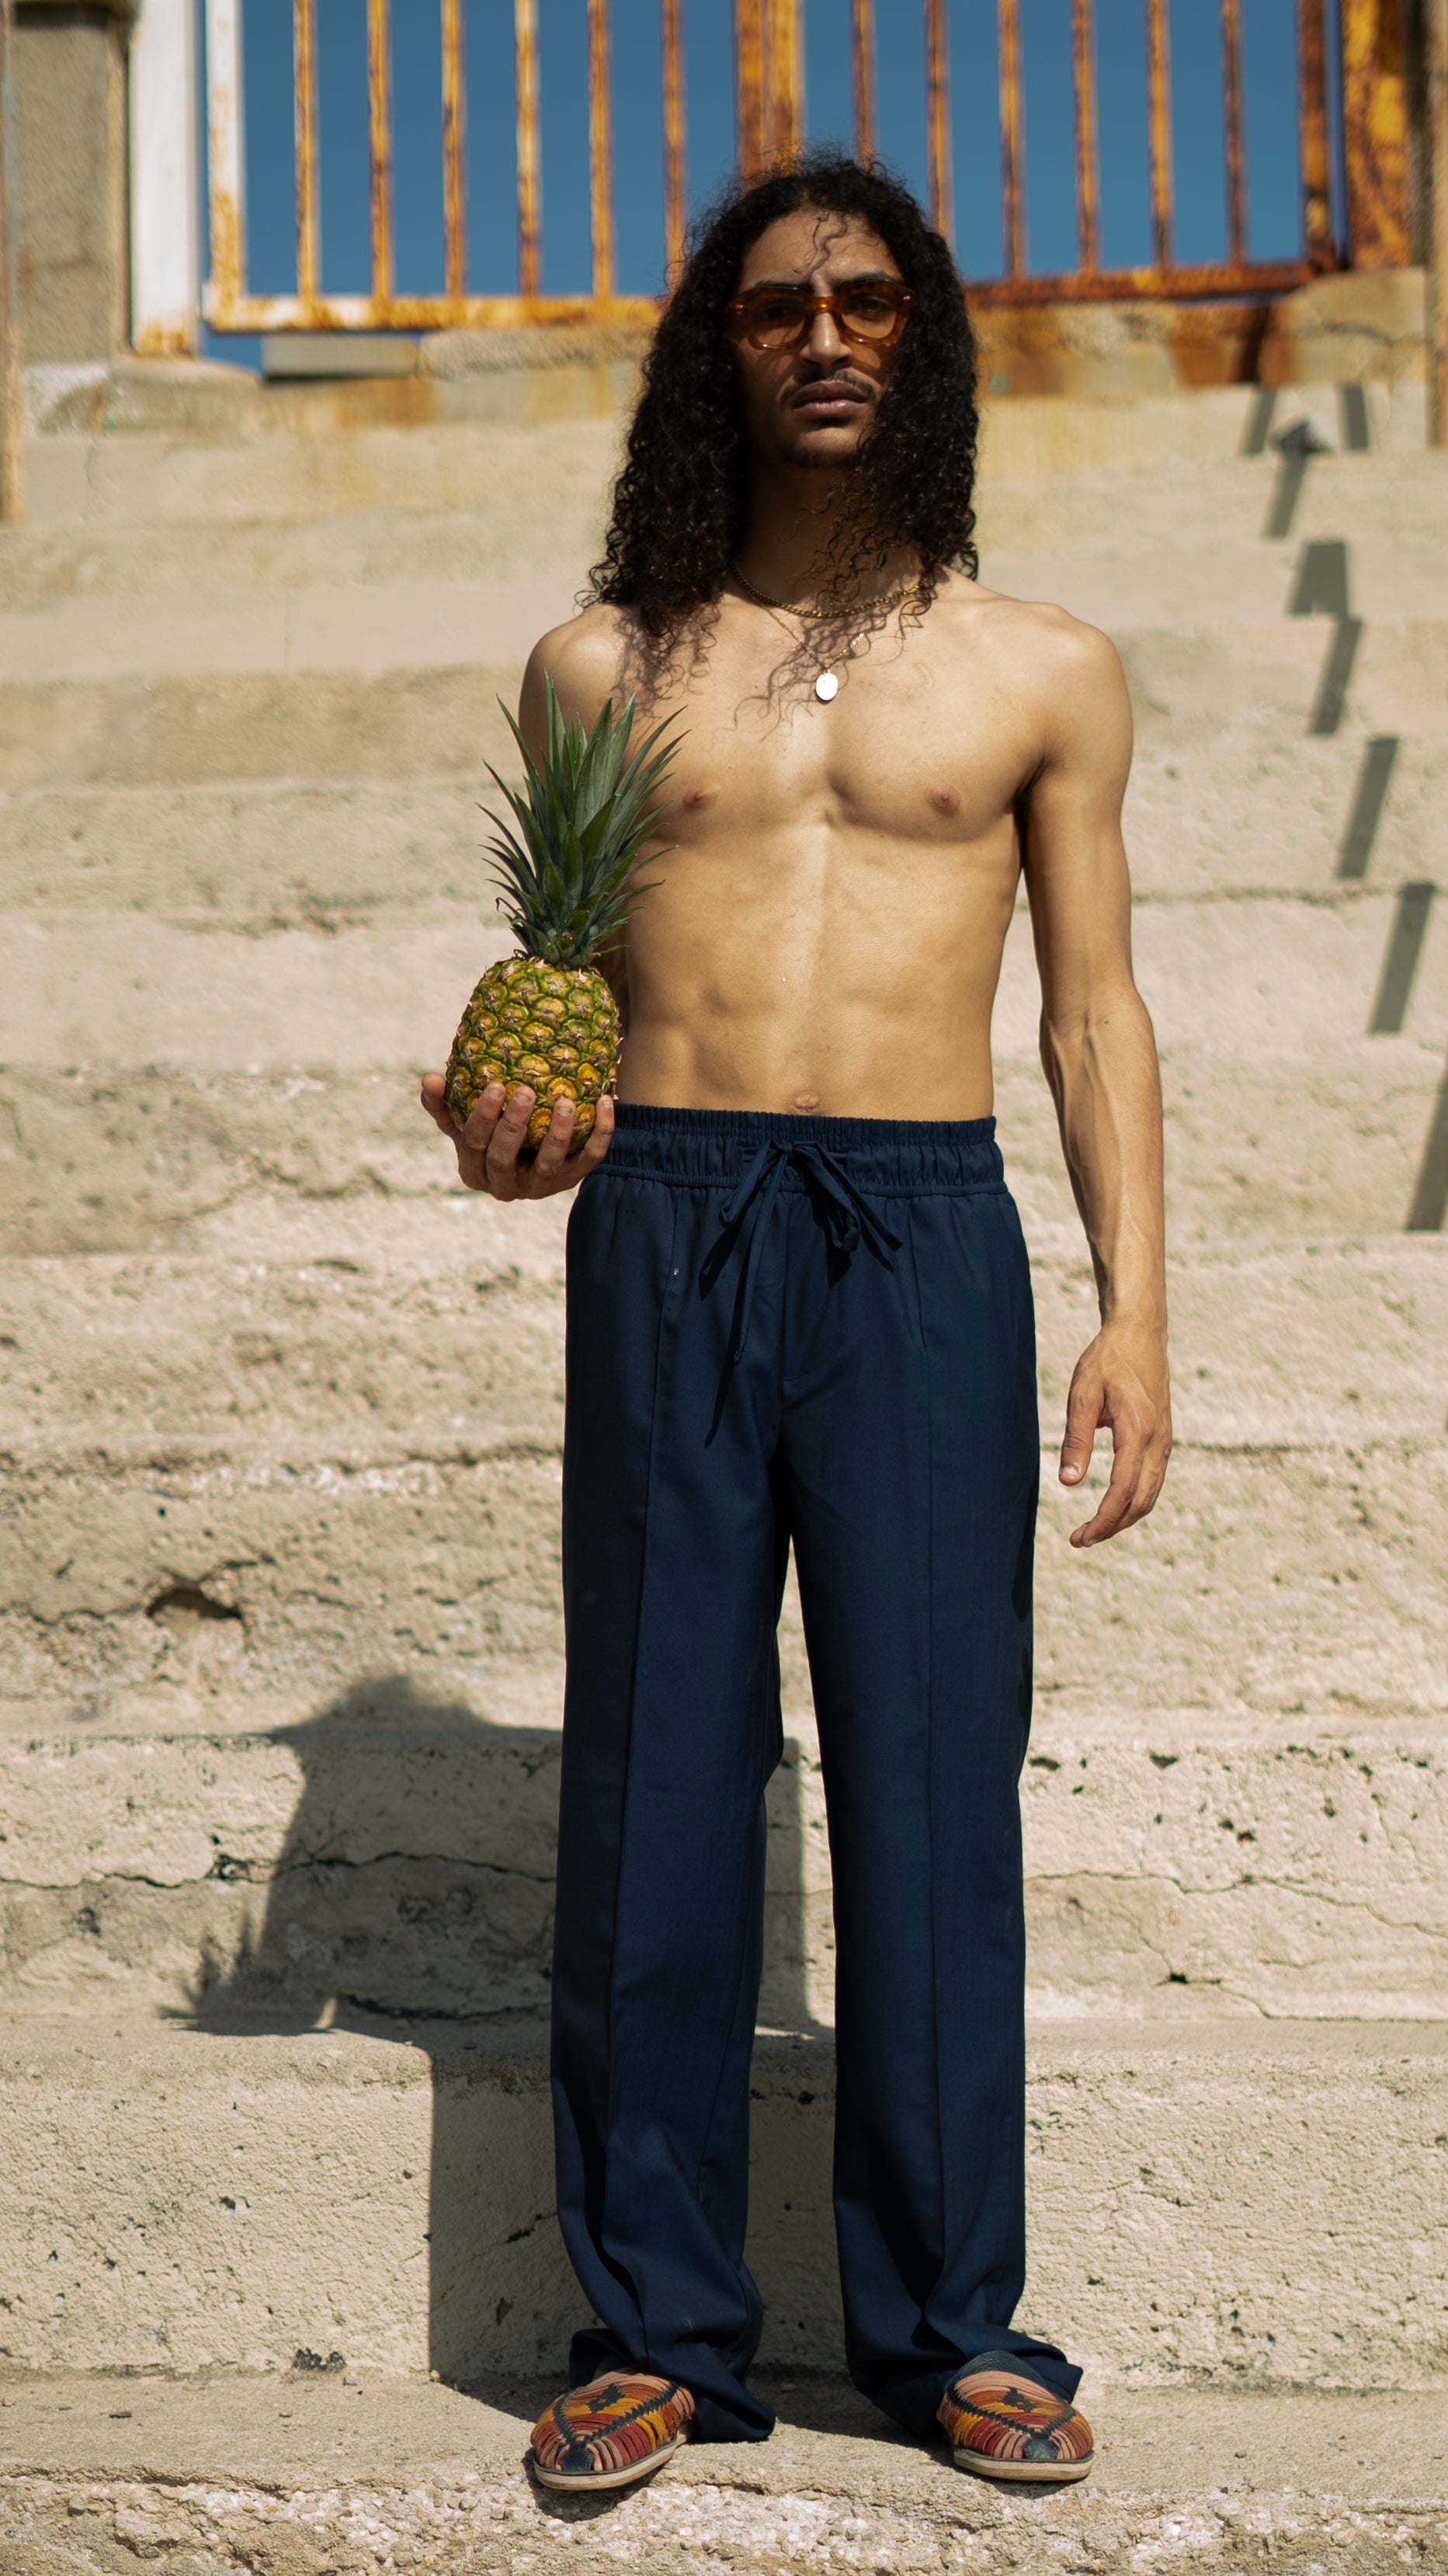 Man_Long_Hair_wearing_Navy Blue Super 110ss Wool Drawstring trousers - Holding a Pineapple